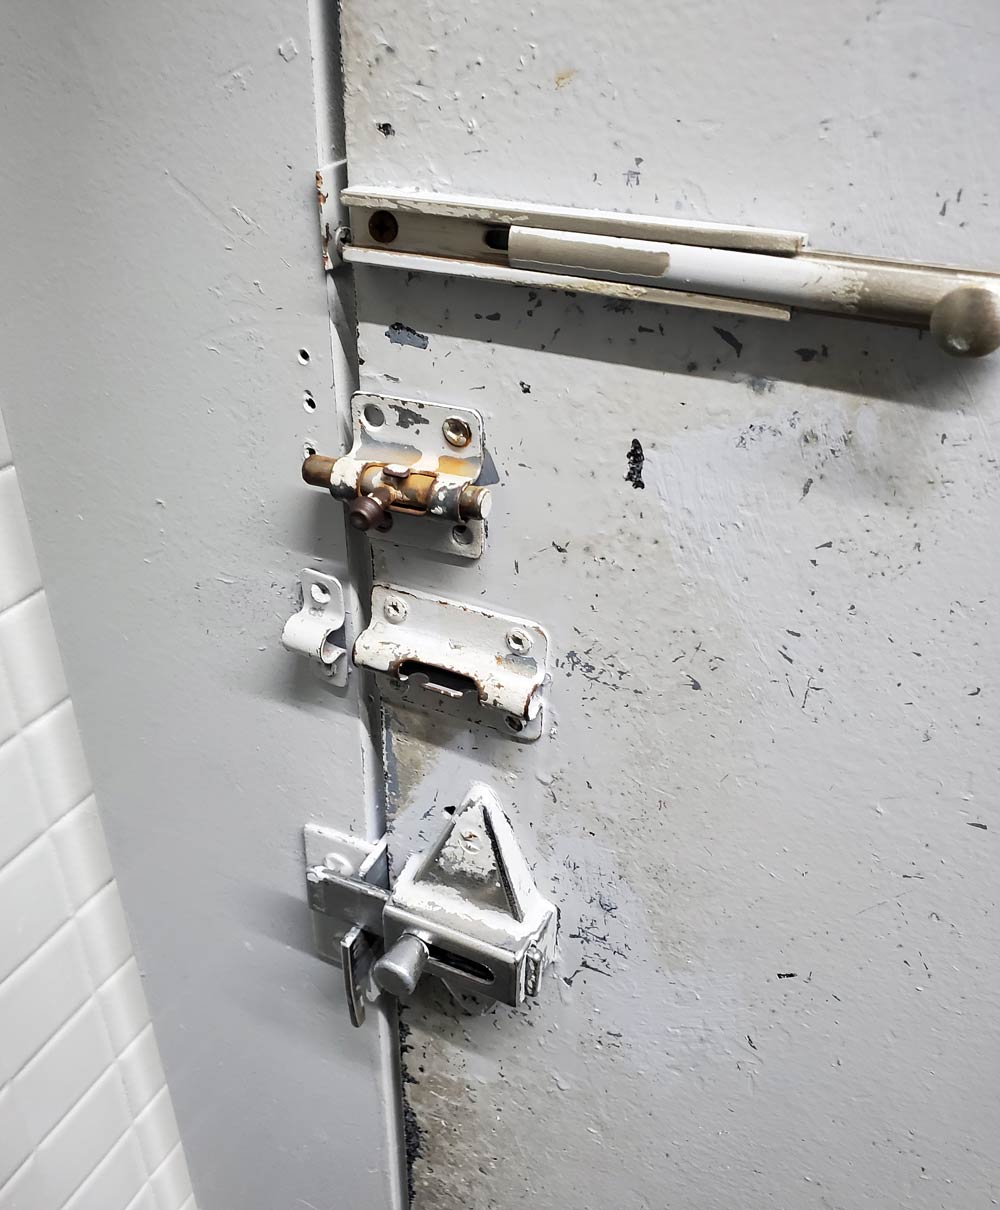 I used a gas station bathroom stall that had 4 locks and all of them were wrong